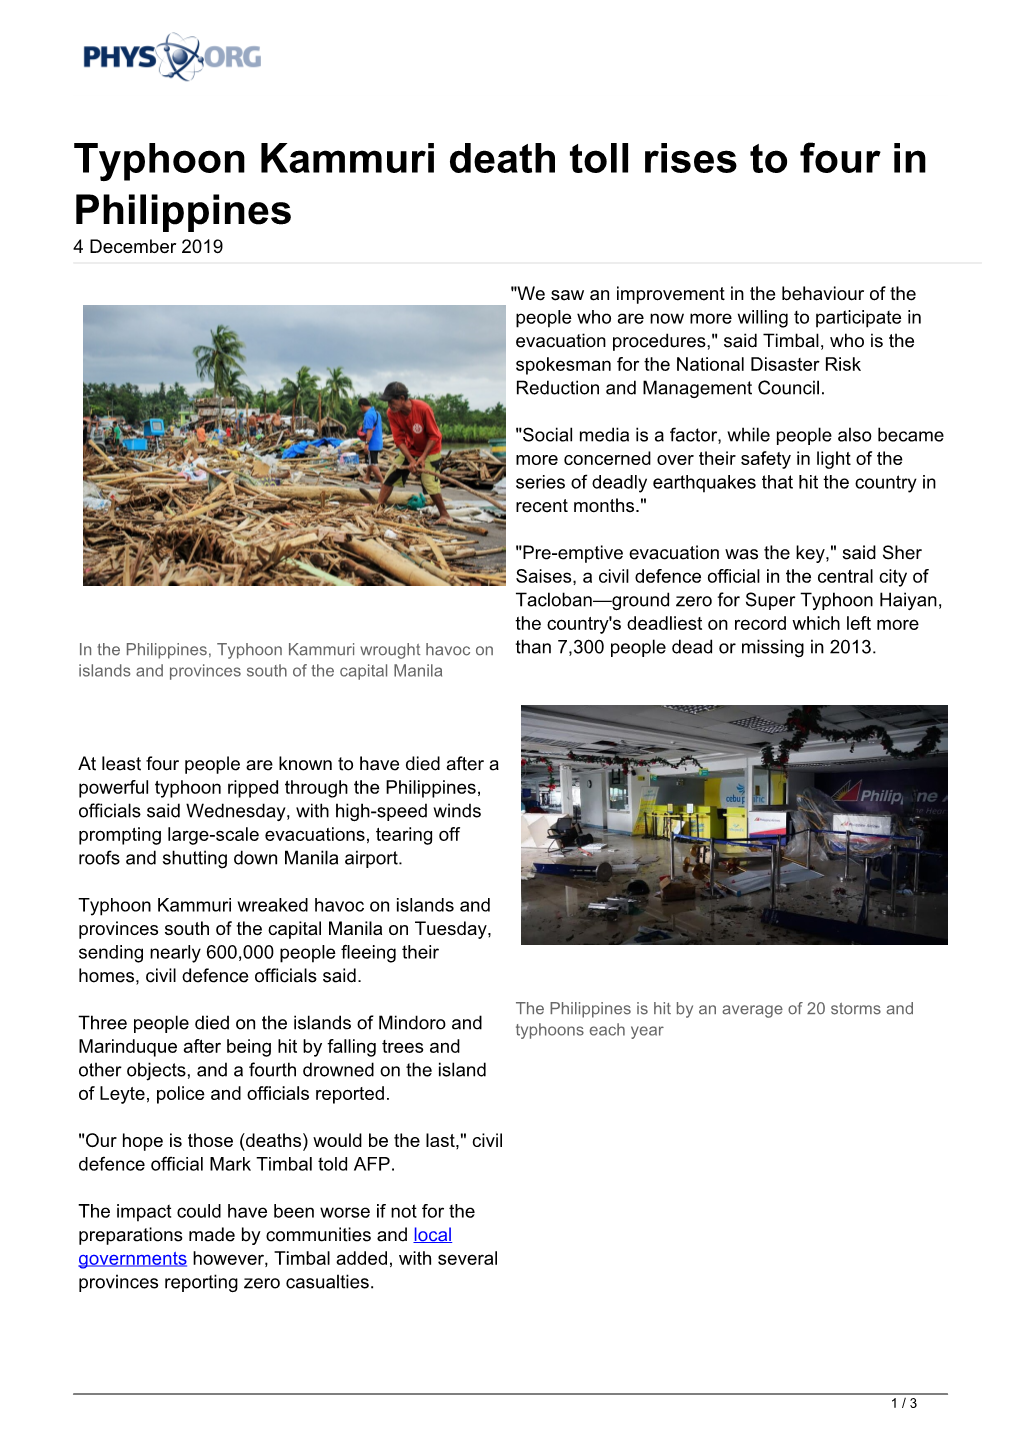 Typhoon Kammuri Death Toll Rises to Four in Philippines 4 December 2019